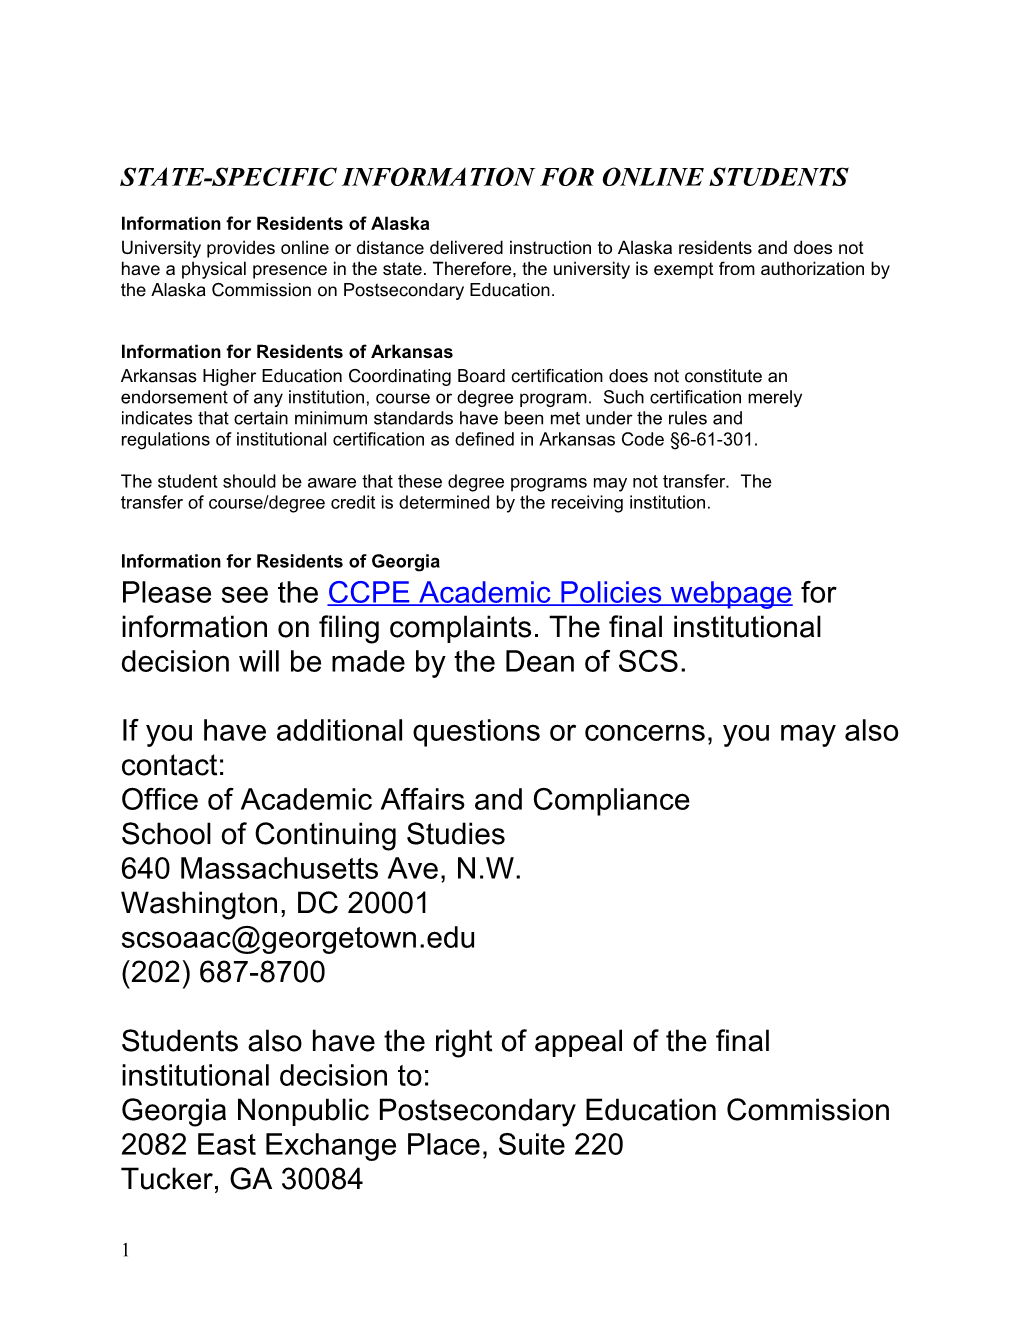 State-Specific Information for Online Students